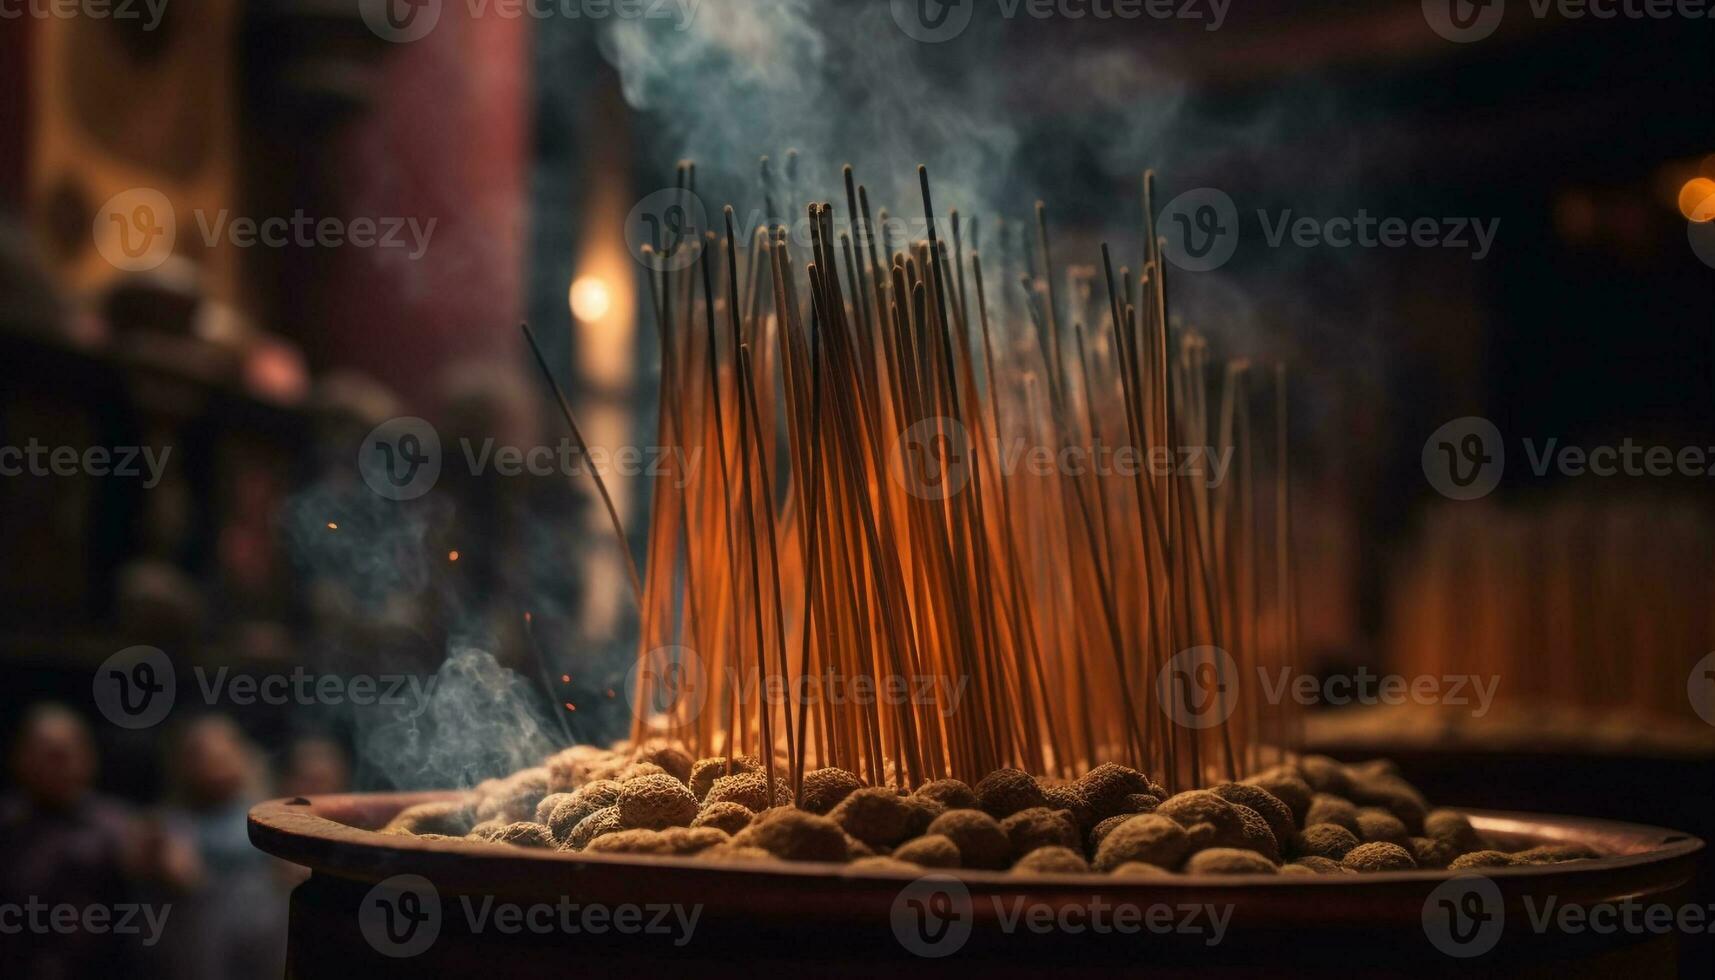 Burning incense, praying men, and glowing yellow flames celebrate spirituality generated by AI photo